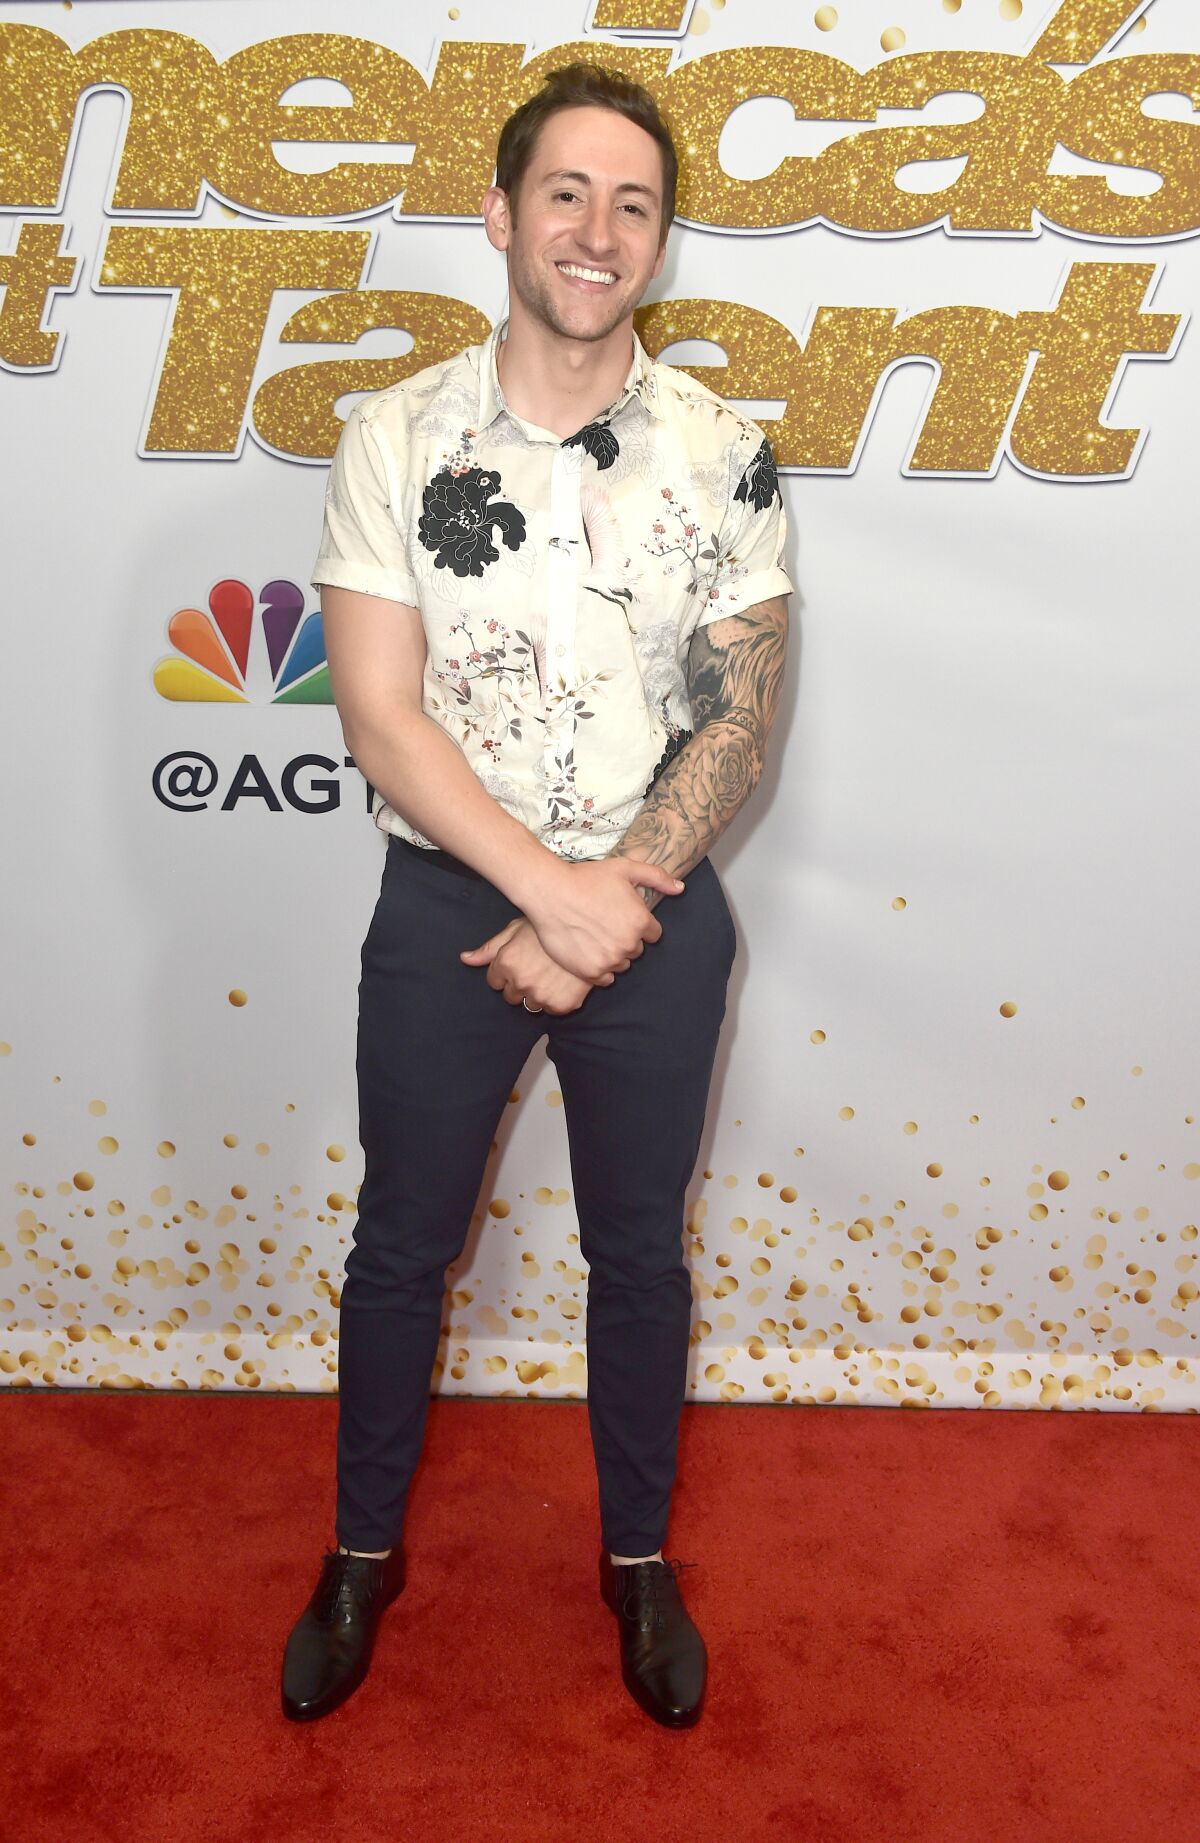 Samuel J. Comroe attends "America's Got Talent" Season 13 Live Show Red Carpet at Dolby Theatre on September 4, 2018 in Hollywood, California.